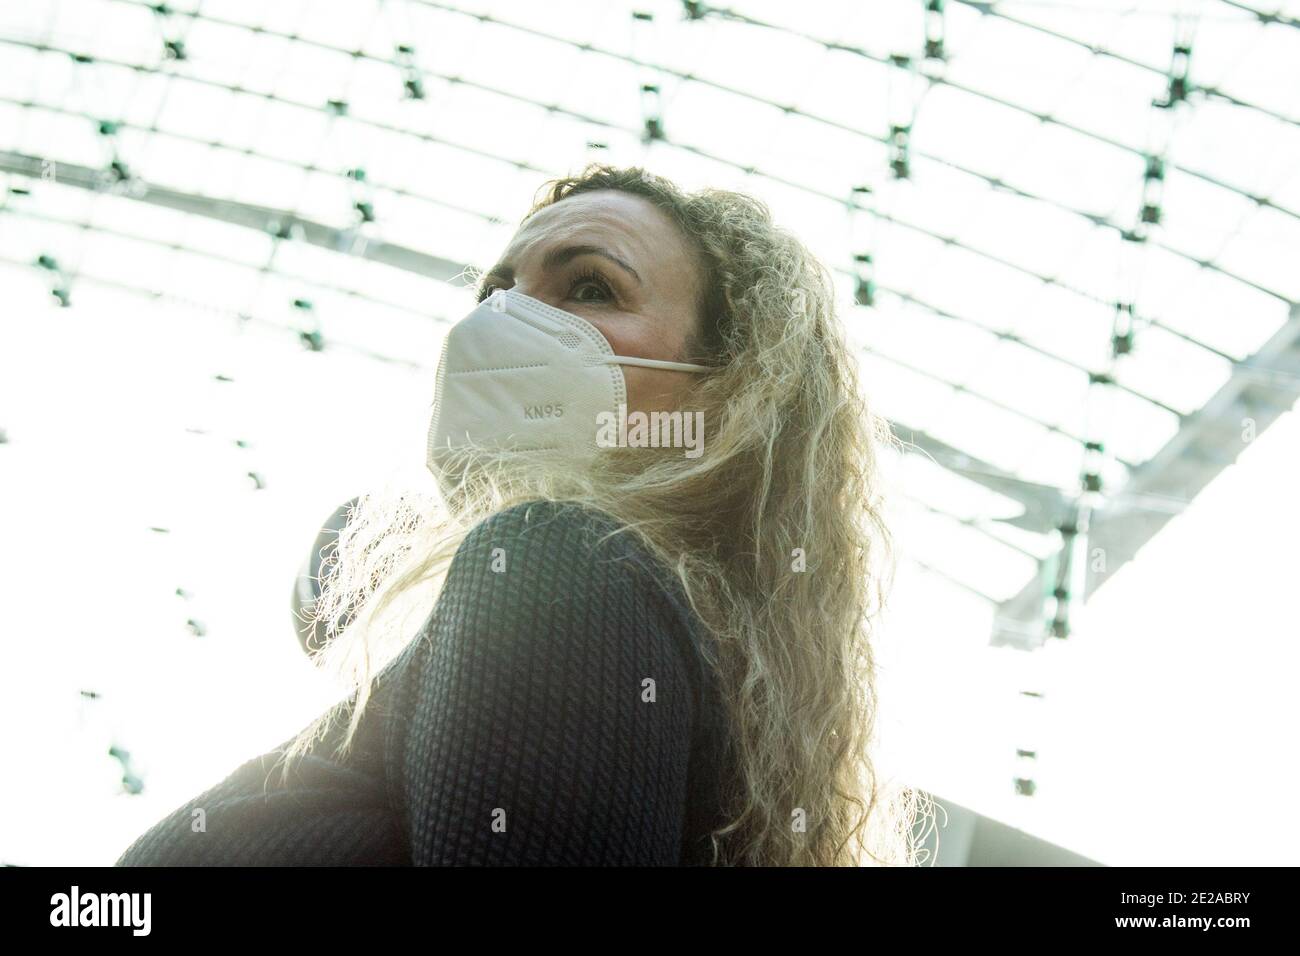 Berlin, Germany. 22nd Oct, 2020. Regarding the Themendienst report by Ulf Vogler of 13 January 2021: FFP2 masks provide better protection against the coronavirus compared to everyday masks. Credit: Christin Klose/dpa-tmn/dpa/Alamy Live News Stock Photo